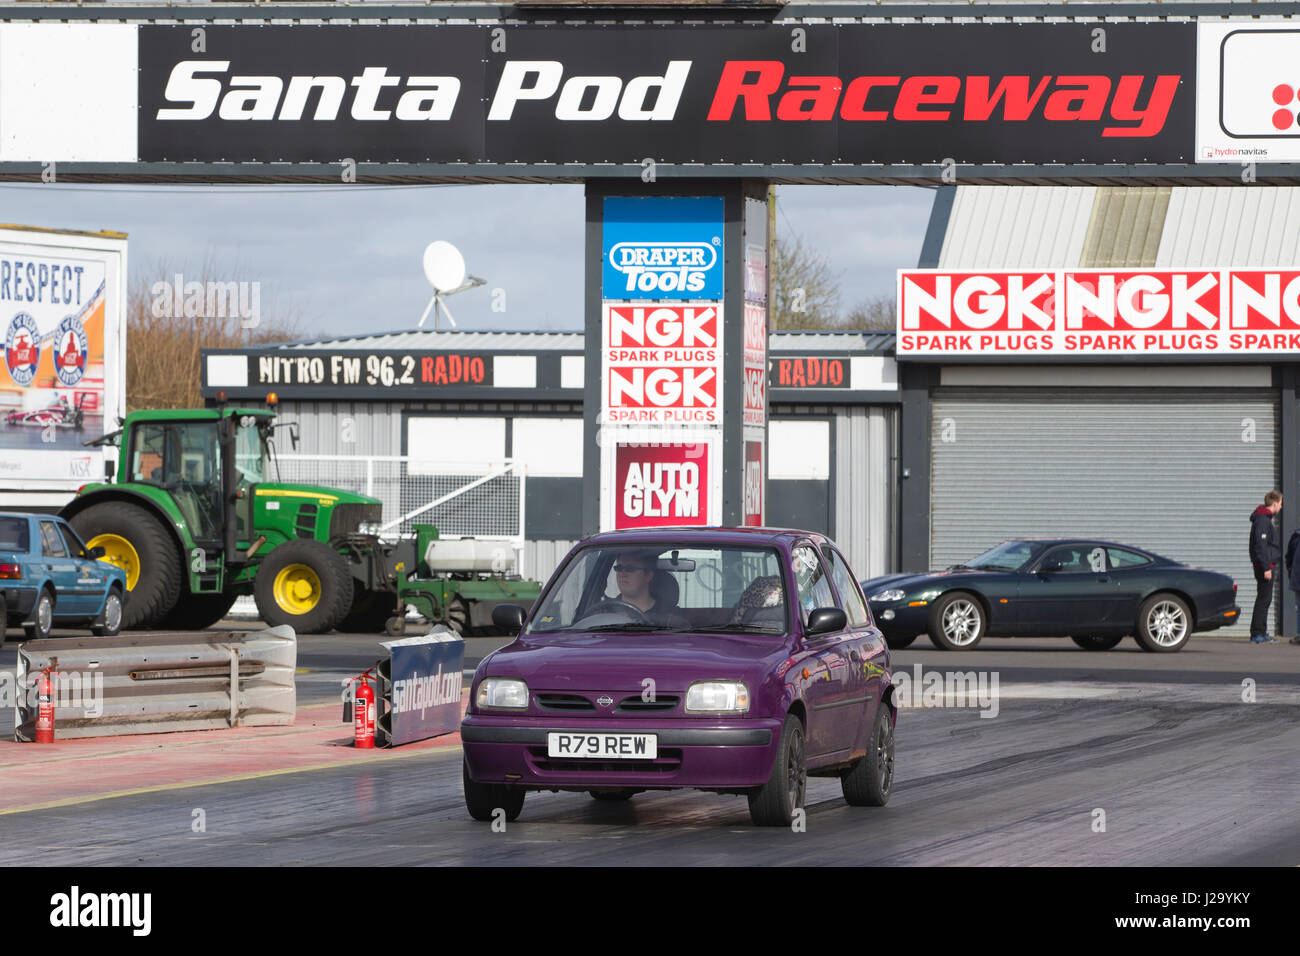 Santa Pod Raceway, located in Podington, Bedfordshire, England, is Europe's first permanent drag racing venue, built on a disused WWII air base. Stock Photo